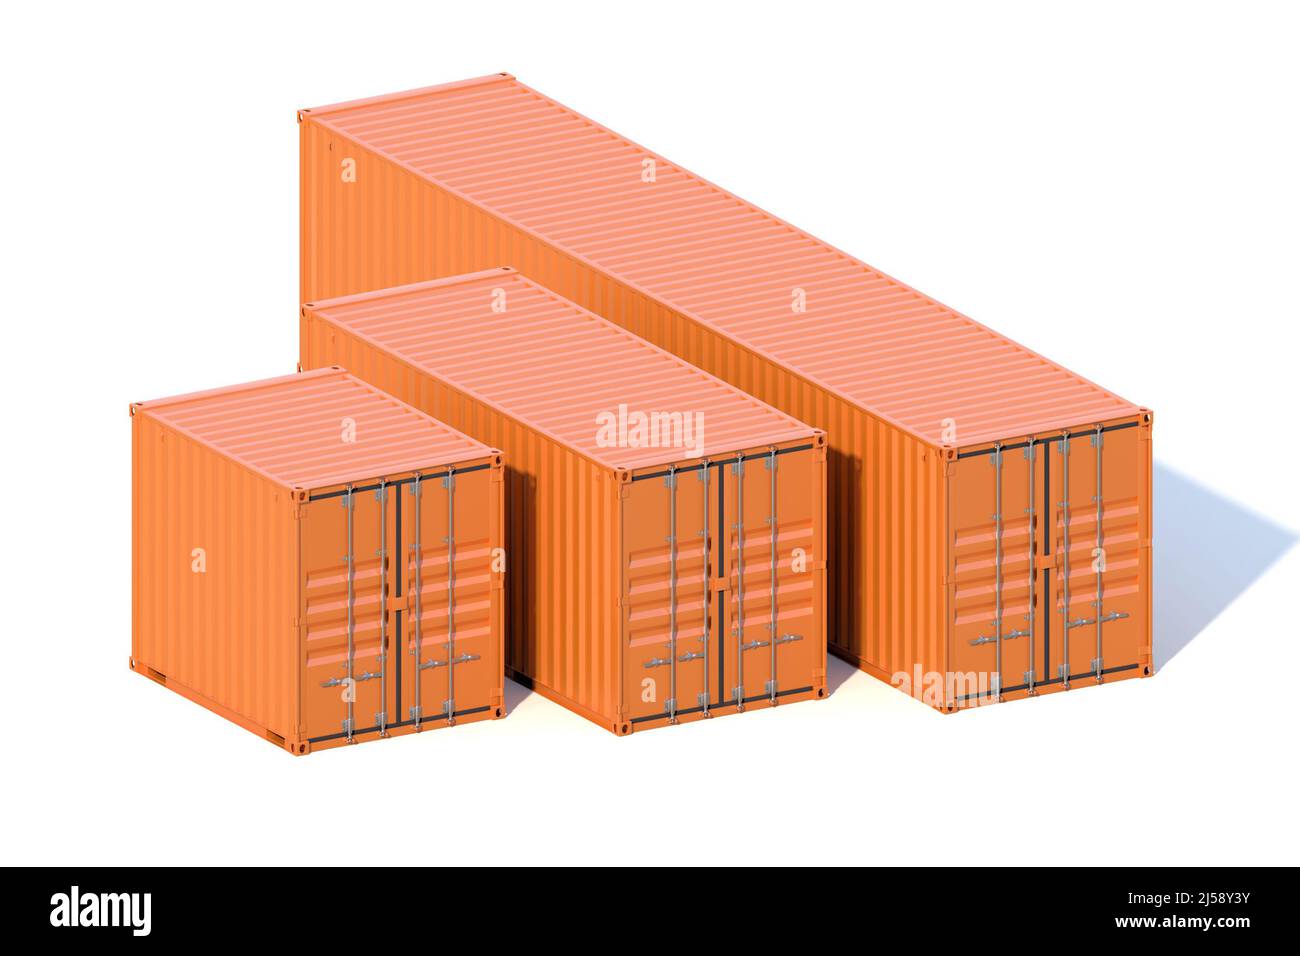 Set of 3 ship cargo containers 10 20 40 feet length. Brown metallic freight box isolated on white background. Marine logistics, harbor warehouse, cust Stock Photo